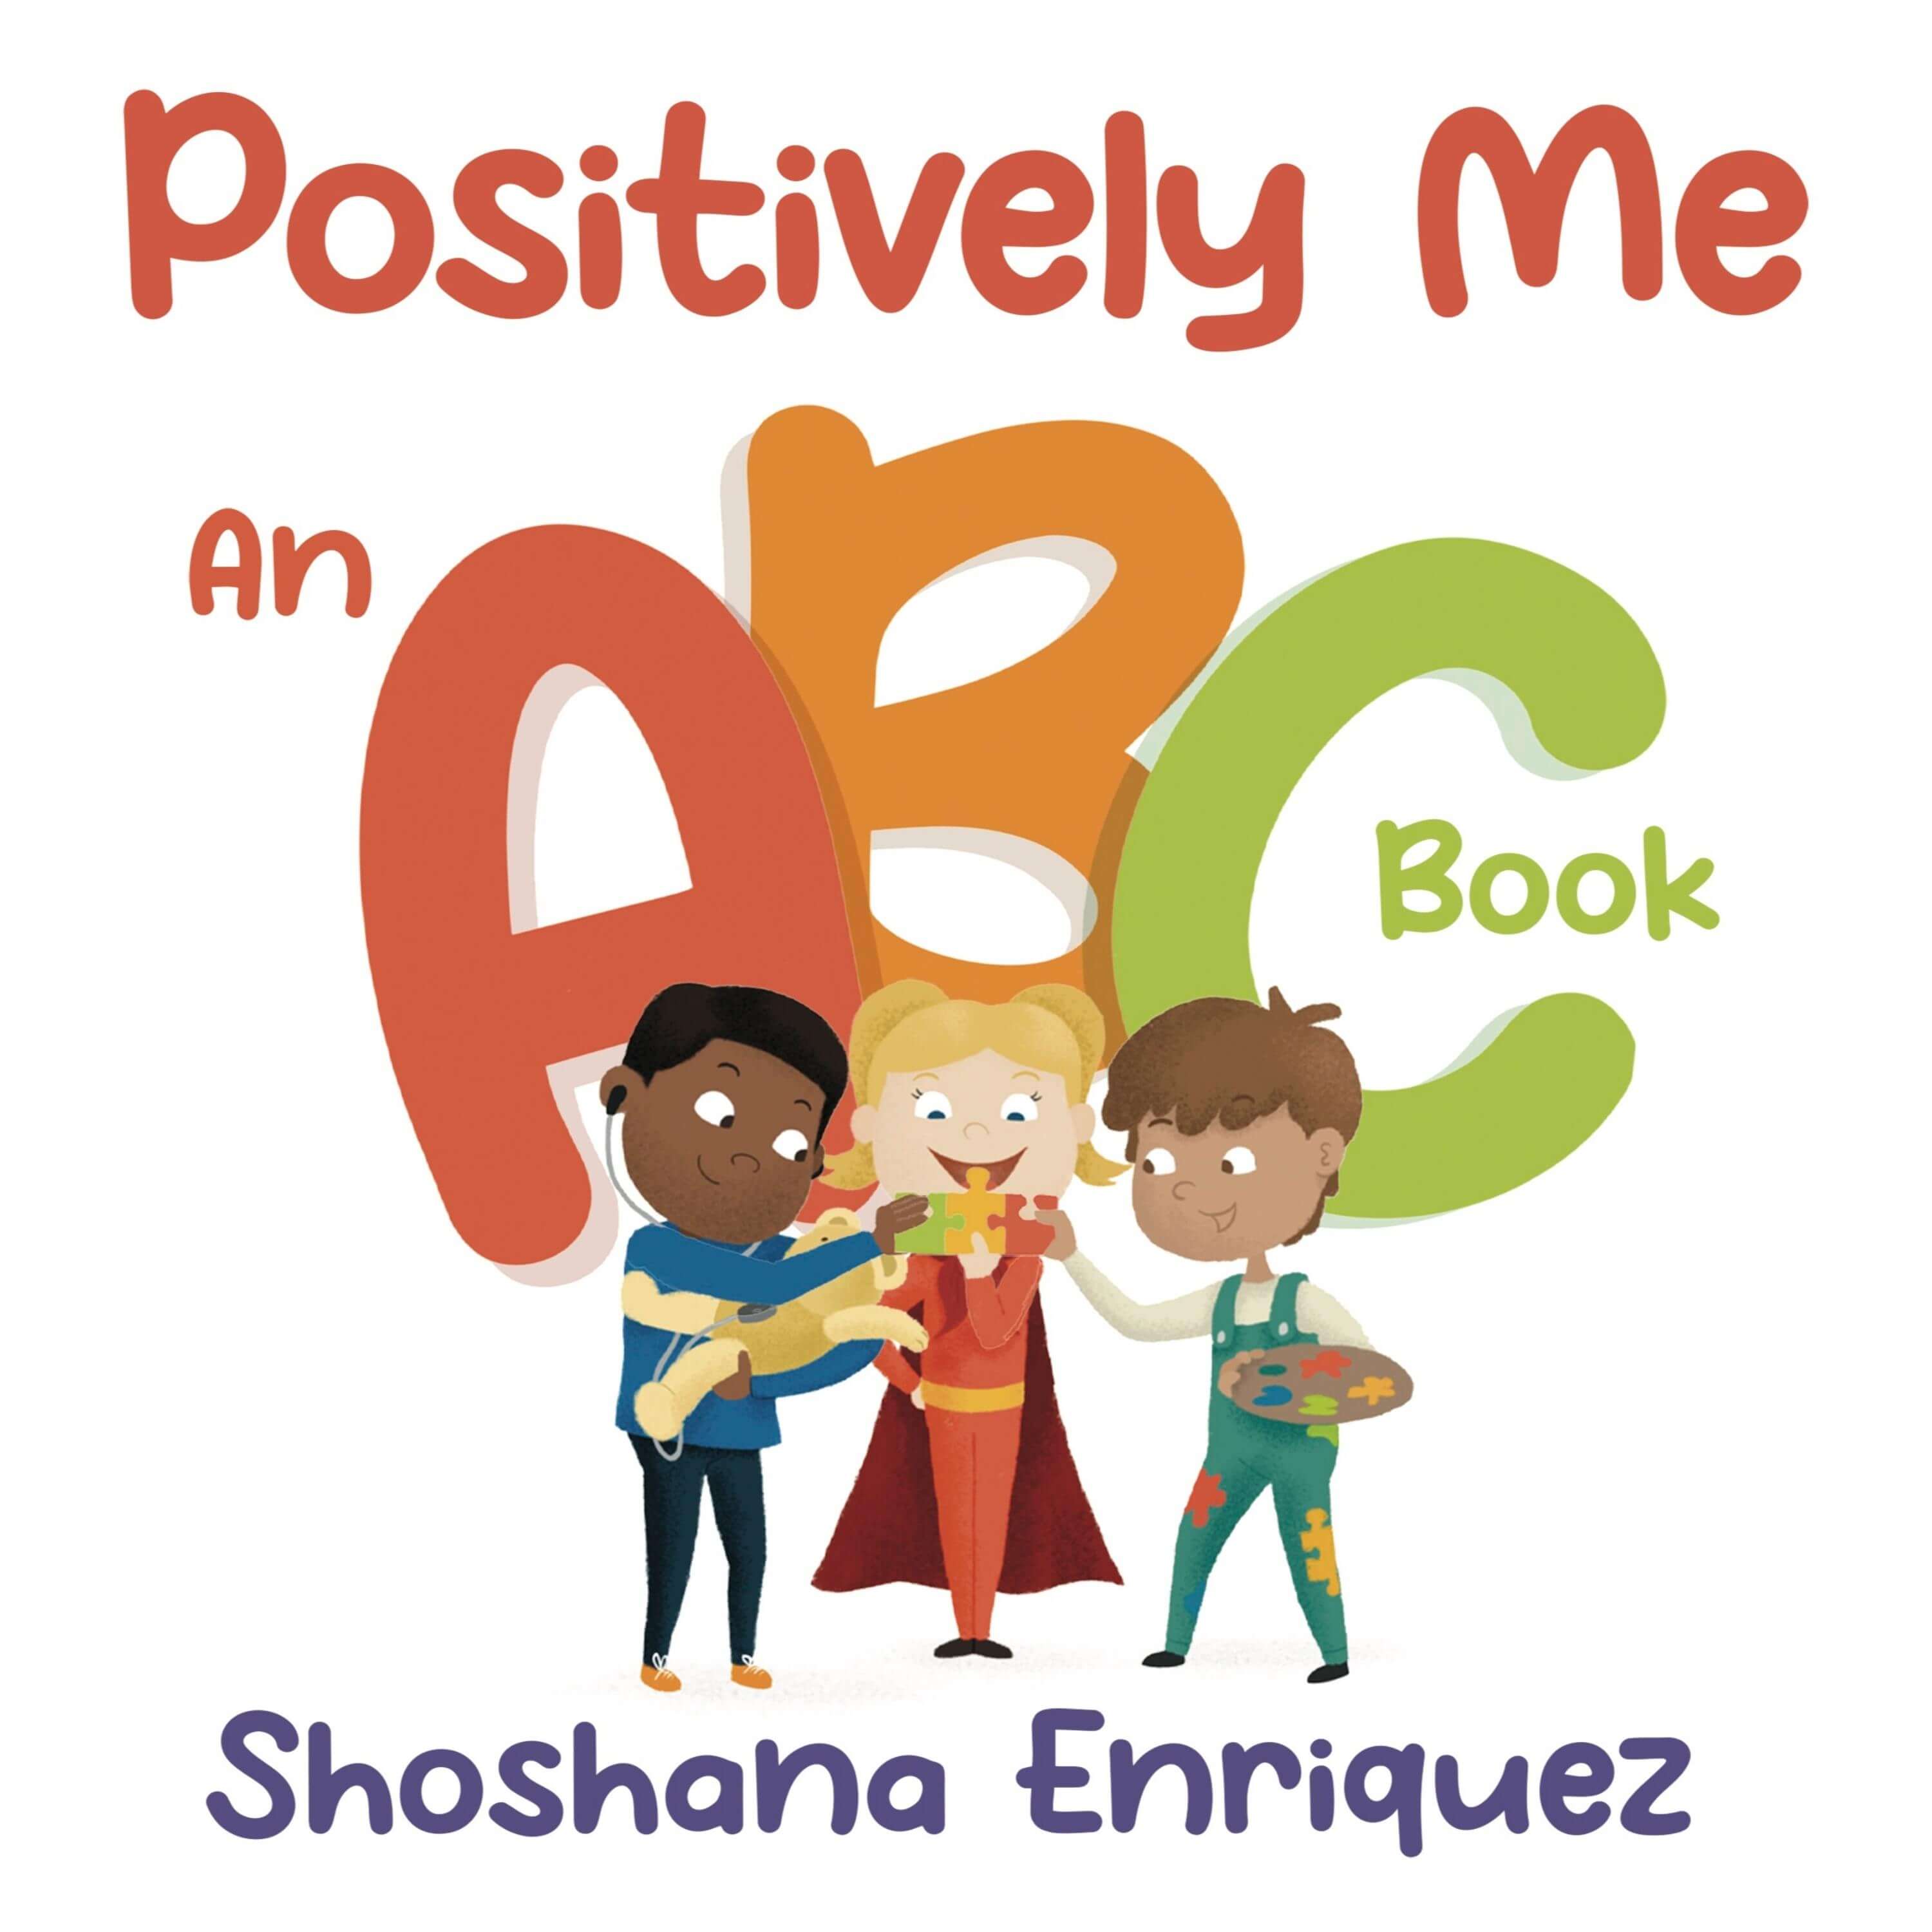 Positively Me: An ABC Book Book Image